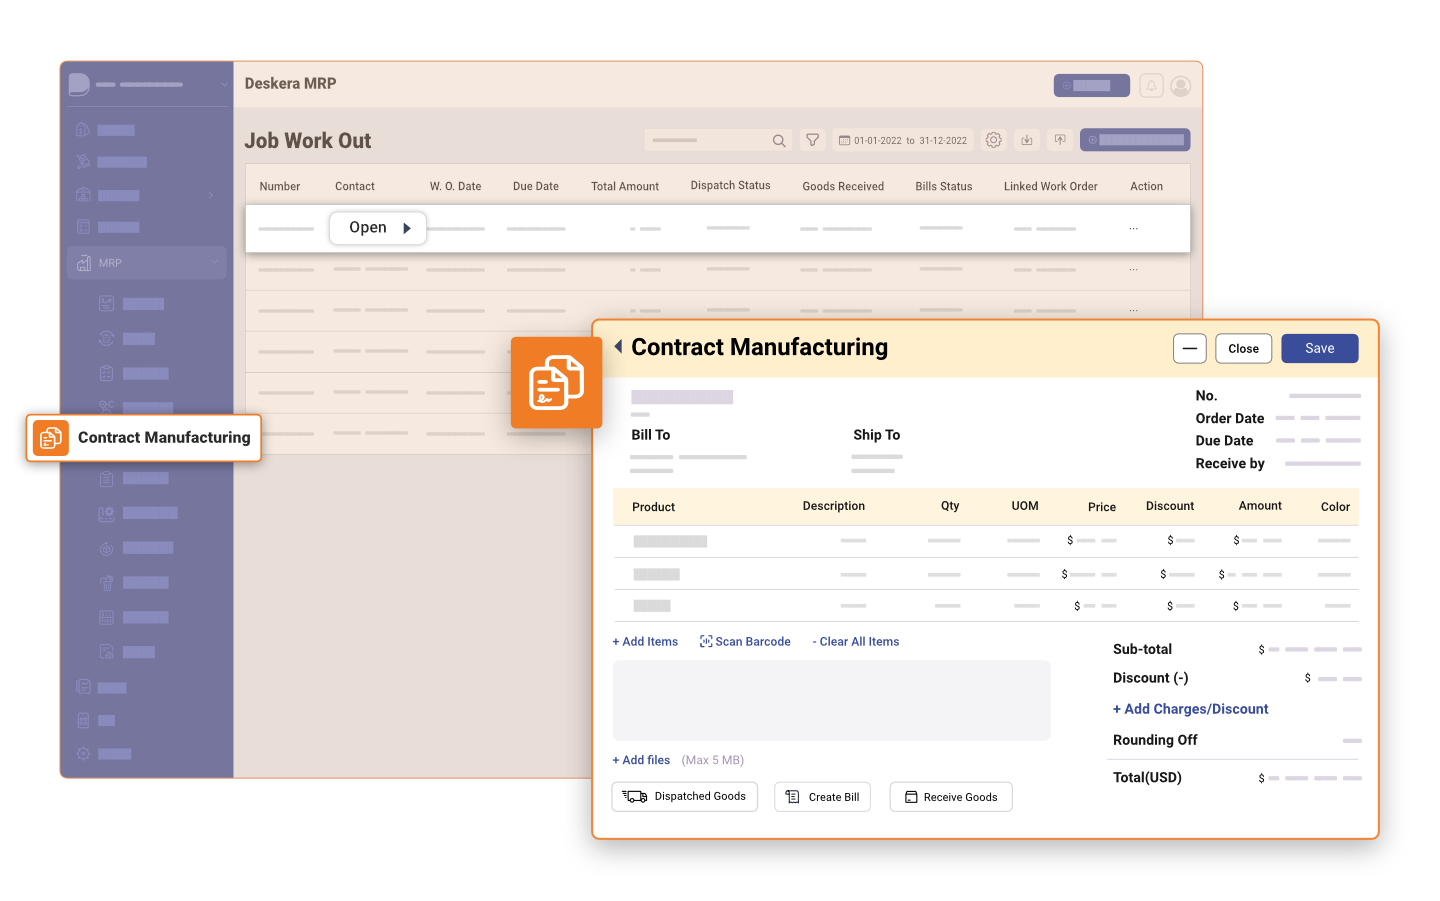 Automate the planning, scheduling, and tracking of outsourced production with integrated tools. Easily monitor the costs and progress of contract manufacturing jobs. Gain visibility of the entire process from supplier selection to order fulfillment